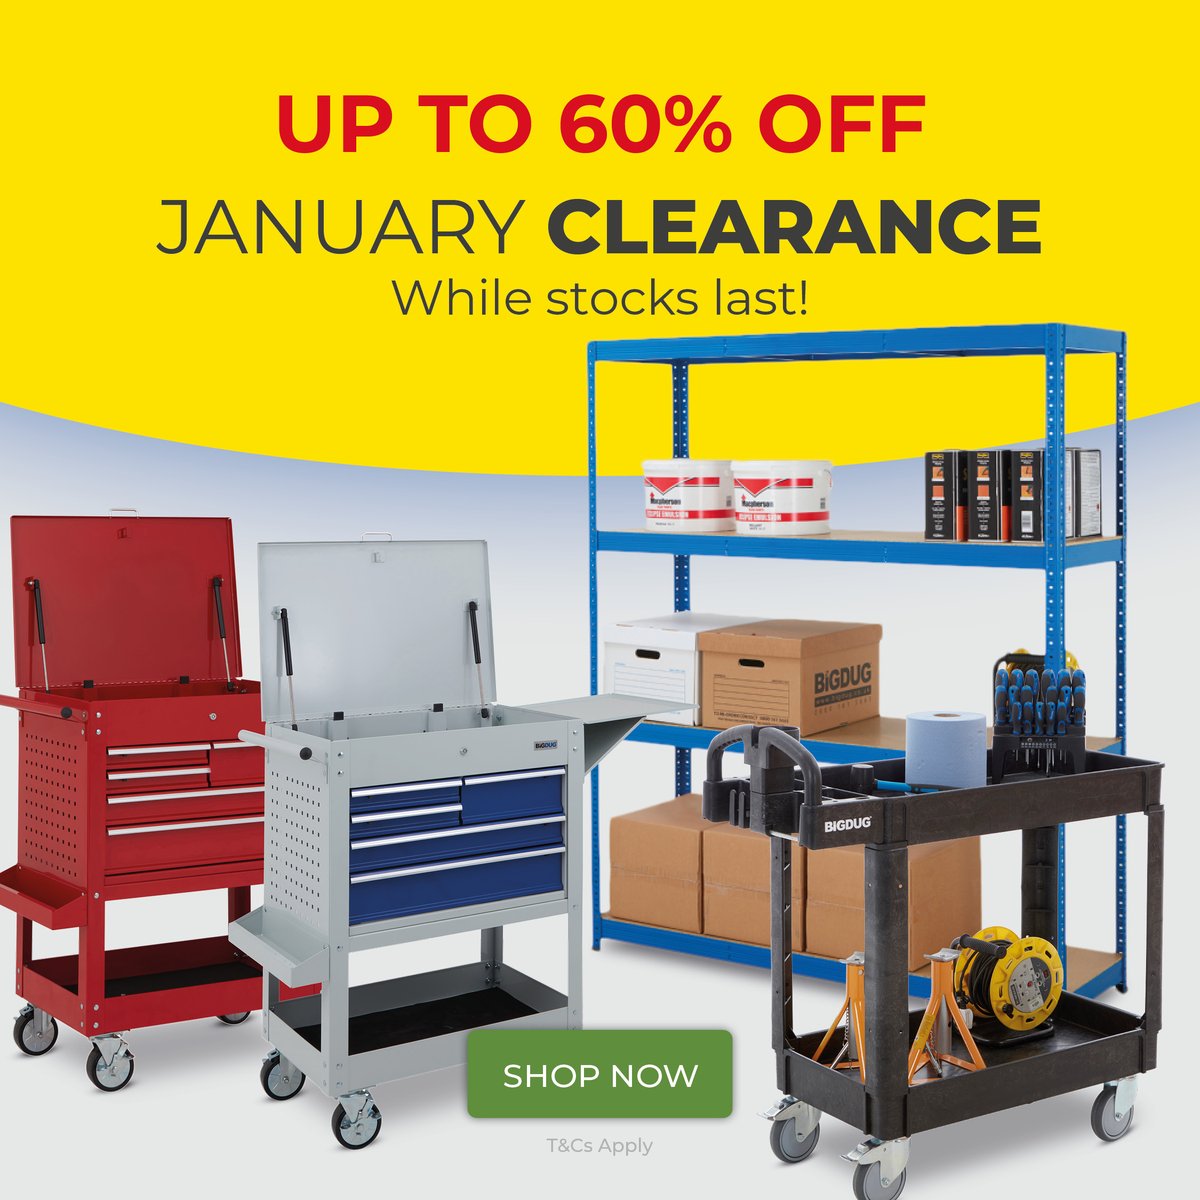 Happy New Year! 🎉 We're kicking off 2024 with BiG savings in our January clearance. From sturdy shelving to must-have storage solutions - we've got it all and with up to 60% off too! Shop now 👉 bit.ly/48ER8GG